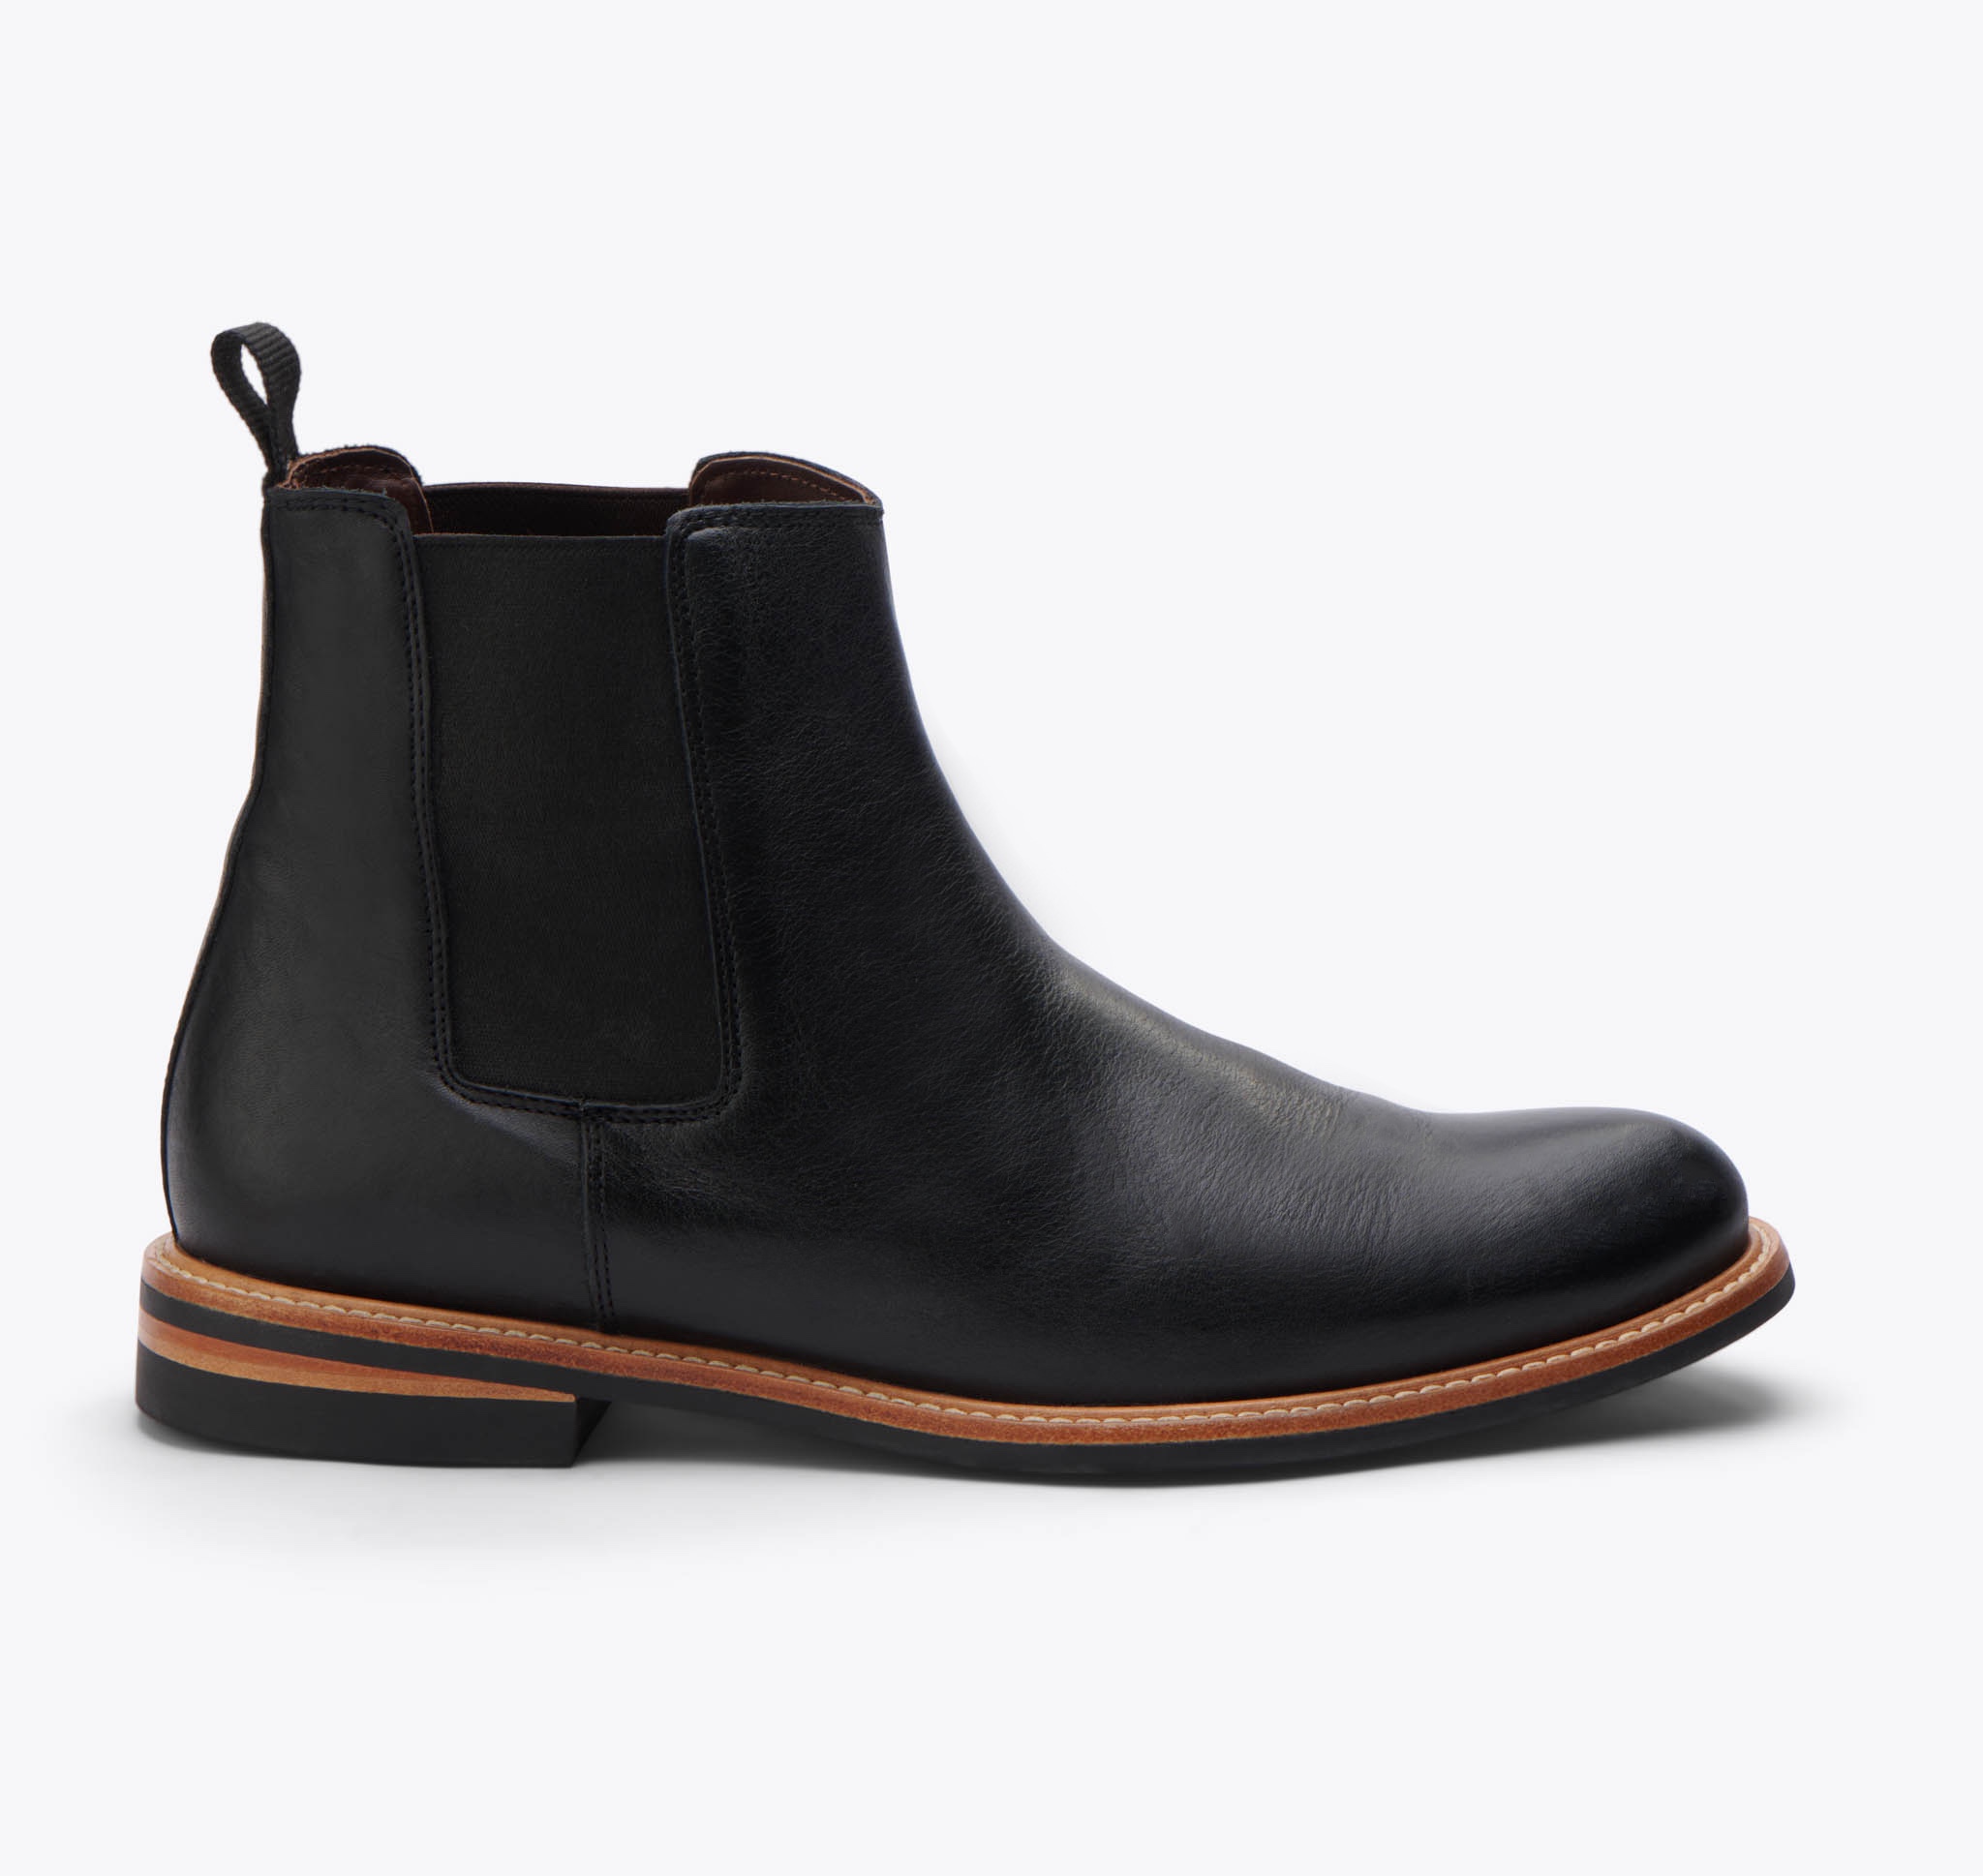 Nisolo All-Weather Chelsea Boot Black - Every Nisolo product is built on the foundation of comfort, function, and design. 